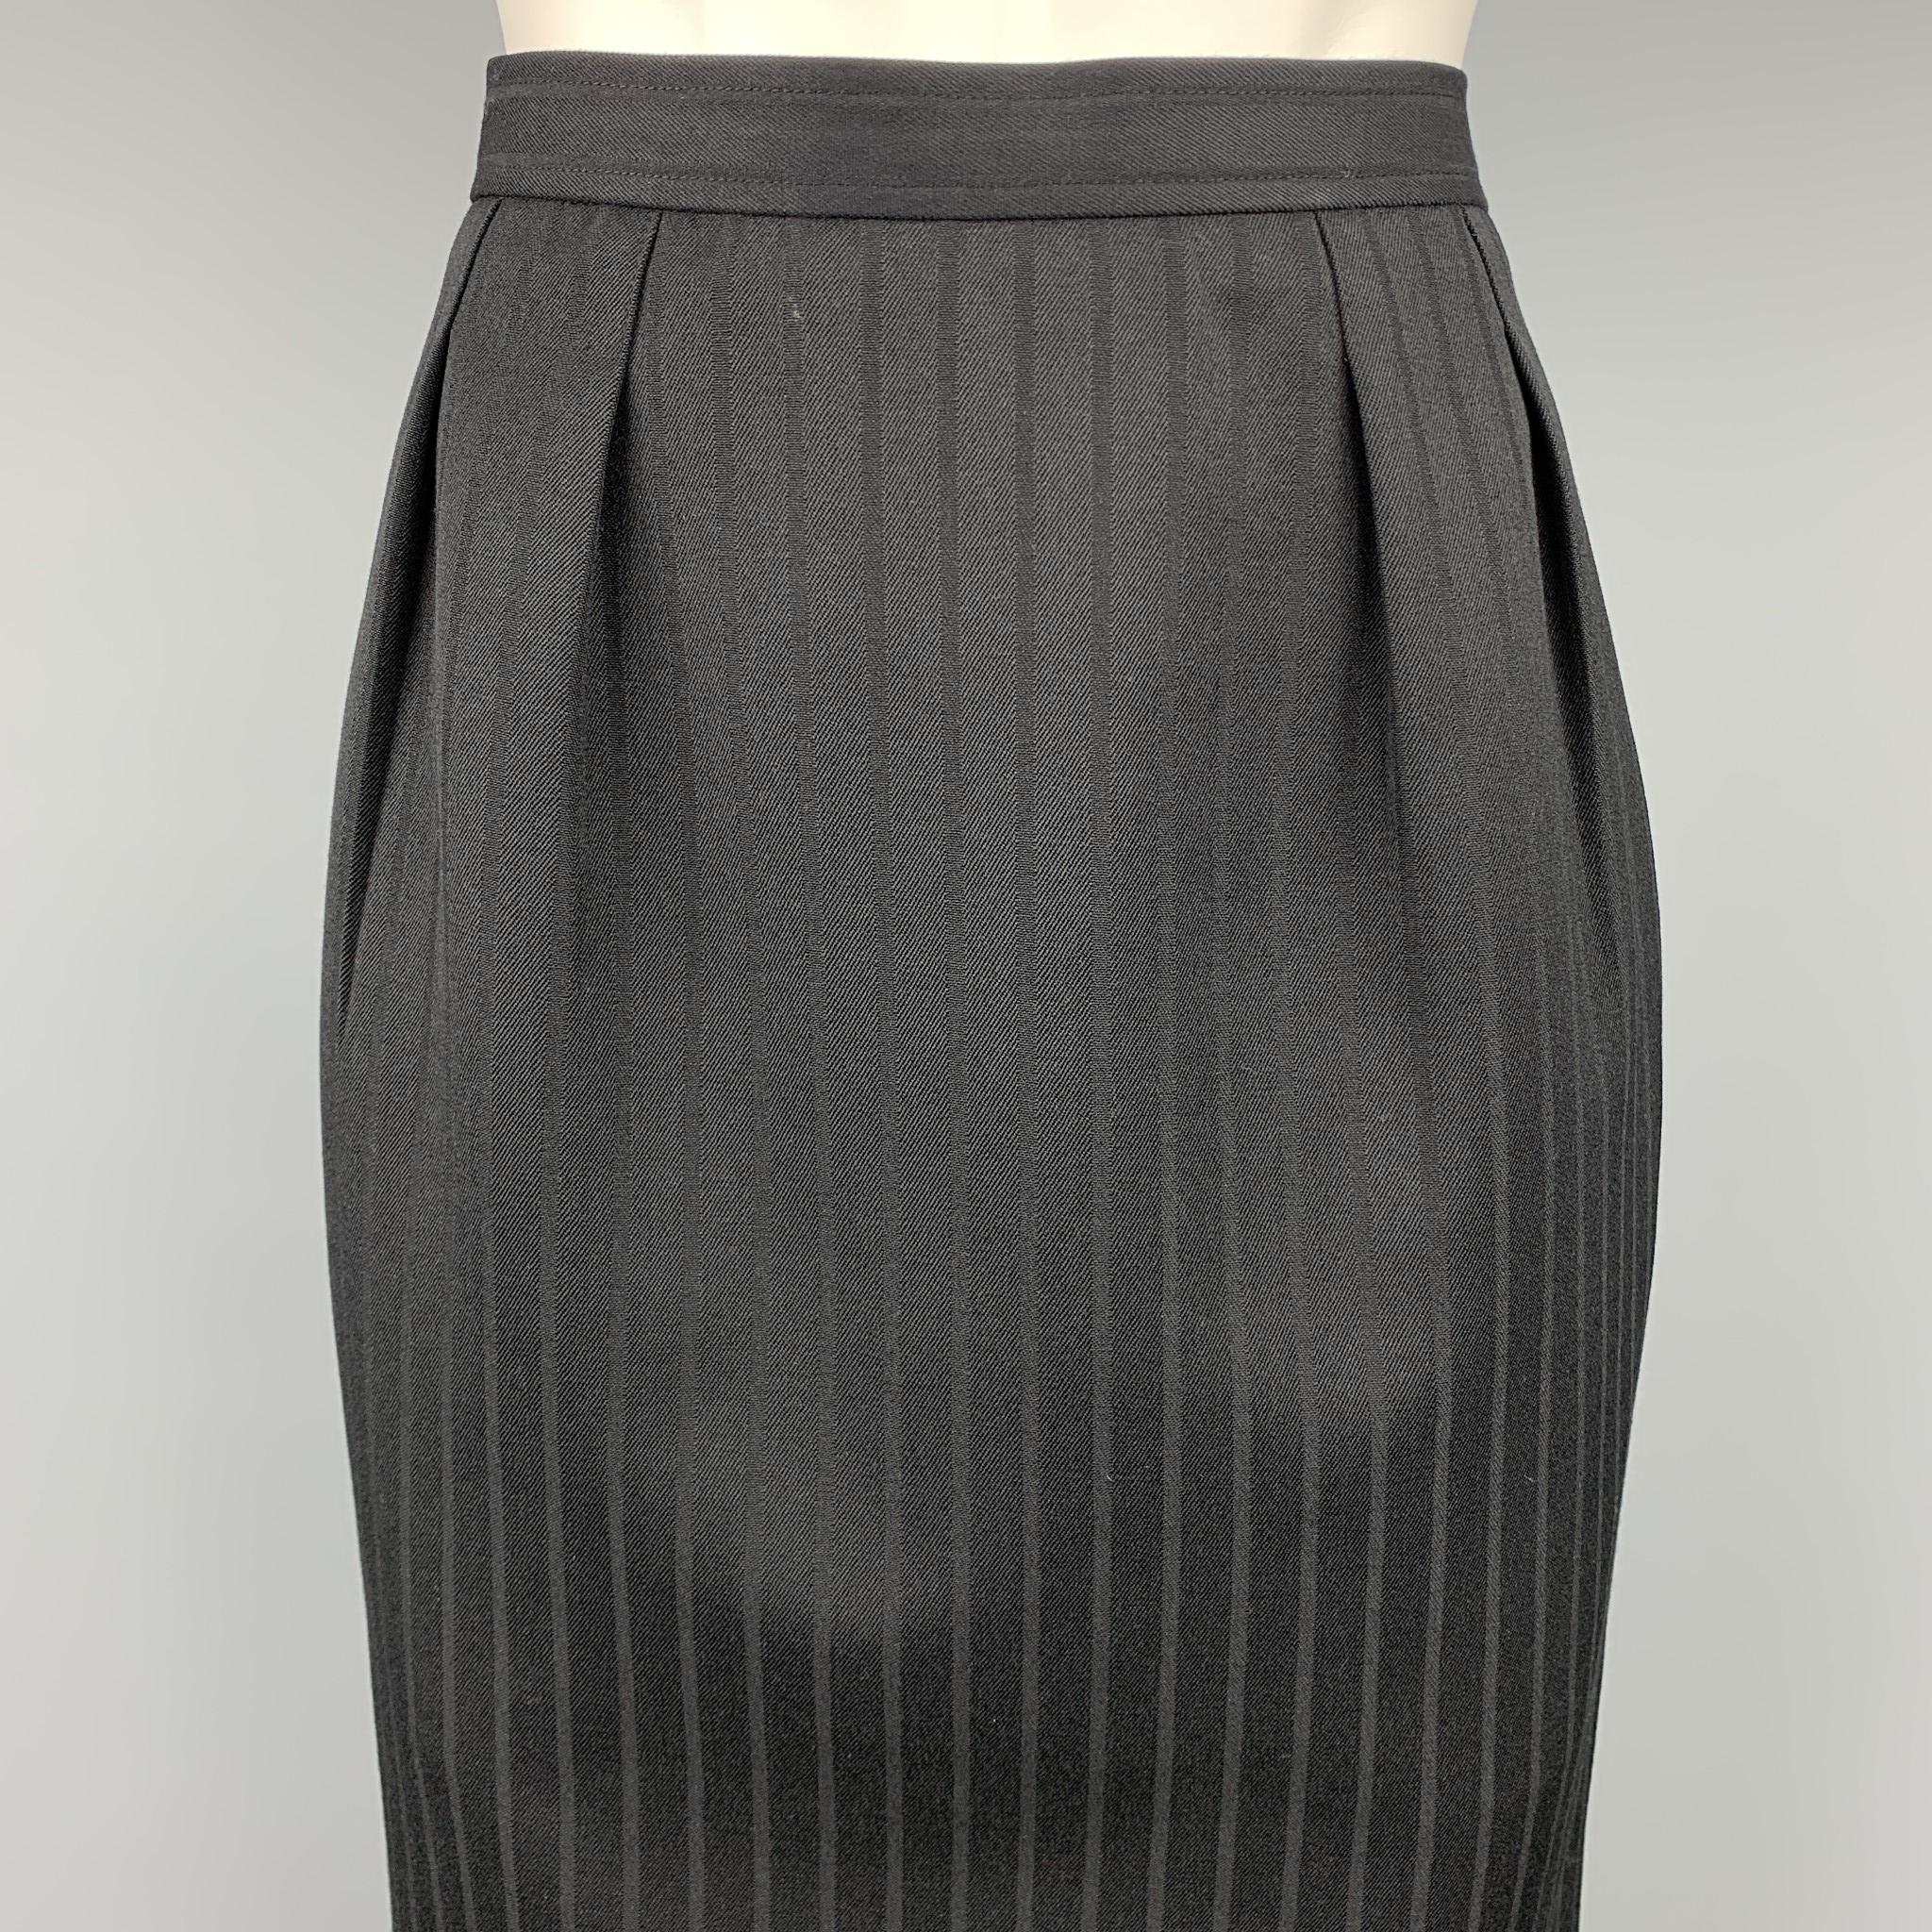 Vintage YVES SAINT LAURENT Rive Gauche skirt comes in a black stripe twill with a full liner featuring a pencil style, pleated, slit pockets, and a side button & zip up closure. Made in France.

Very Good Pre-Owned Condition.
Marked: